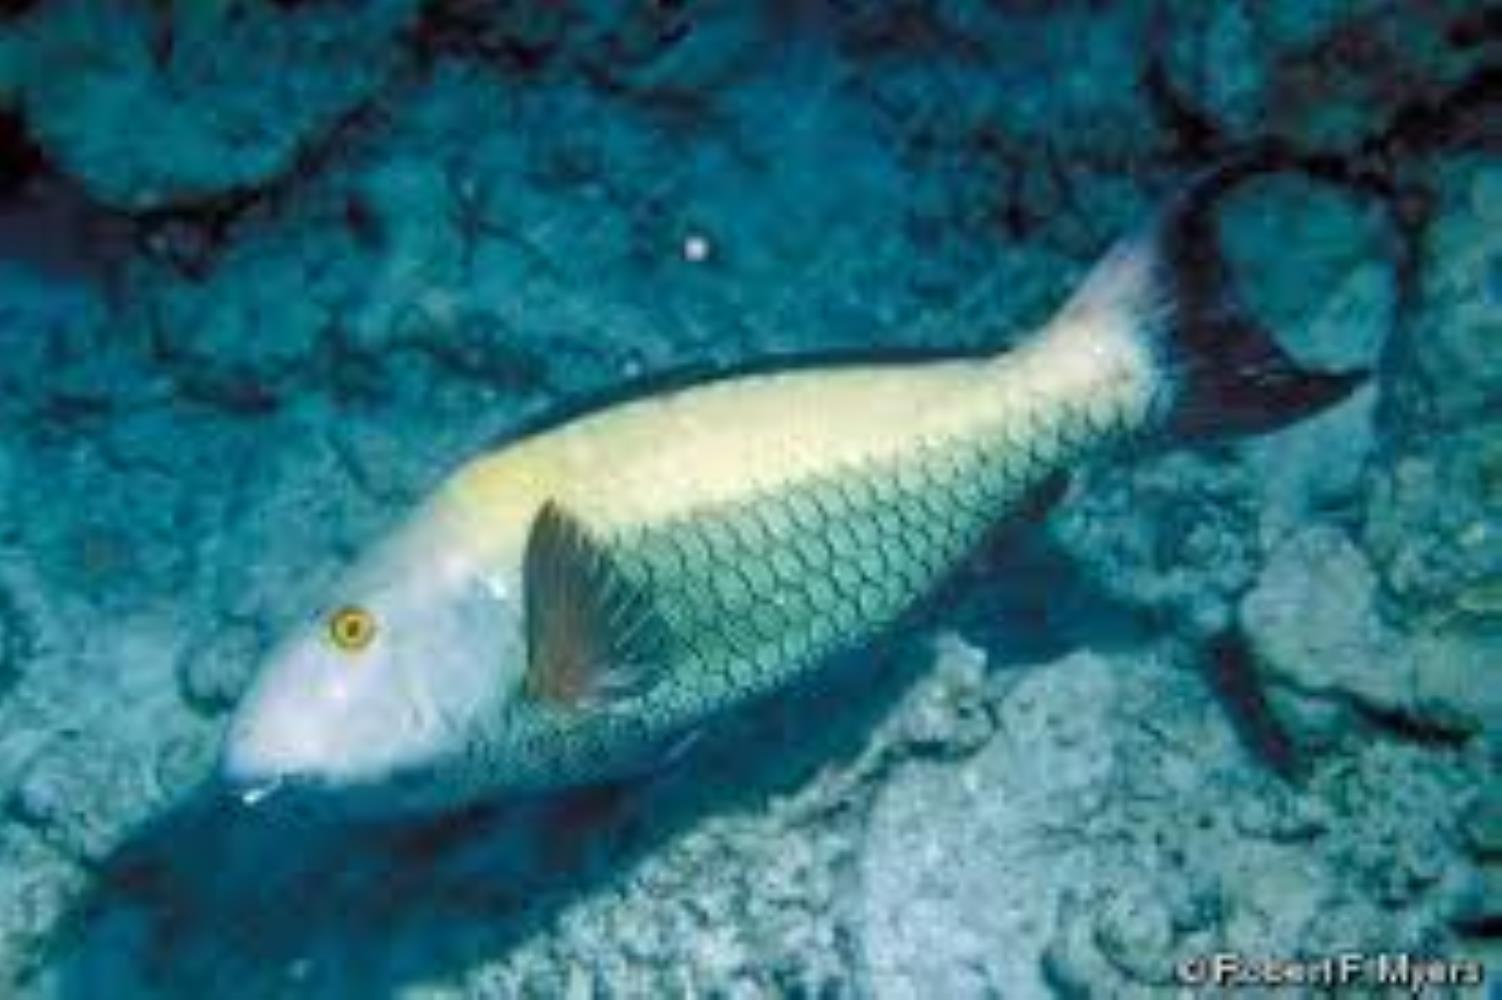 Spotted Parrotfish